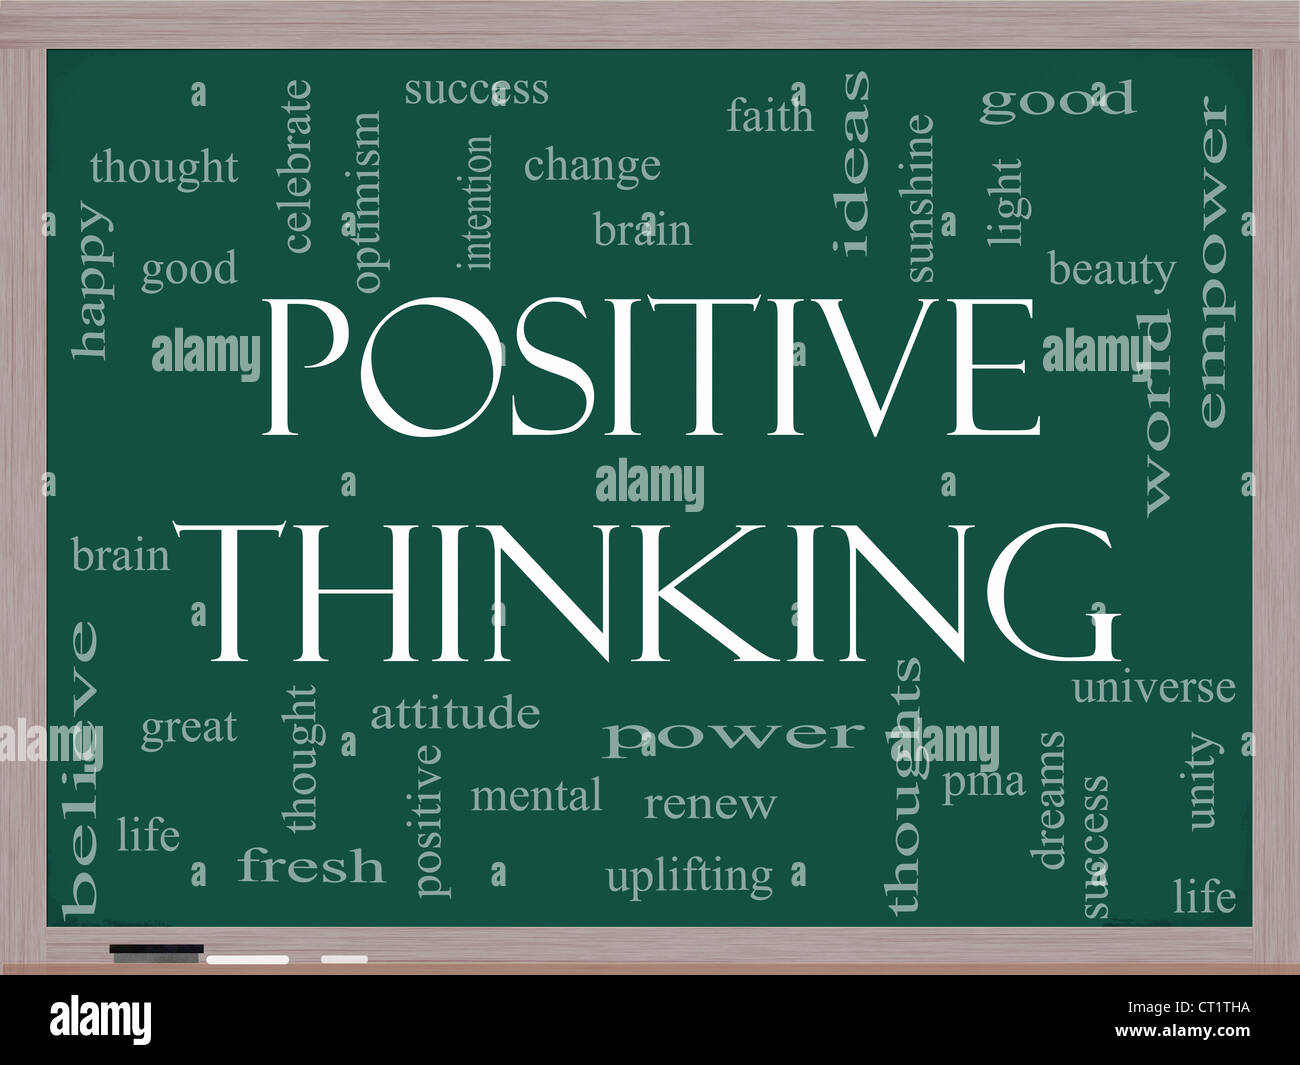 Positive Thinking Word Cloud Concept on a Blackboard with great terms such as good, mental, thought, life, optimism and more Stock Photo